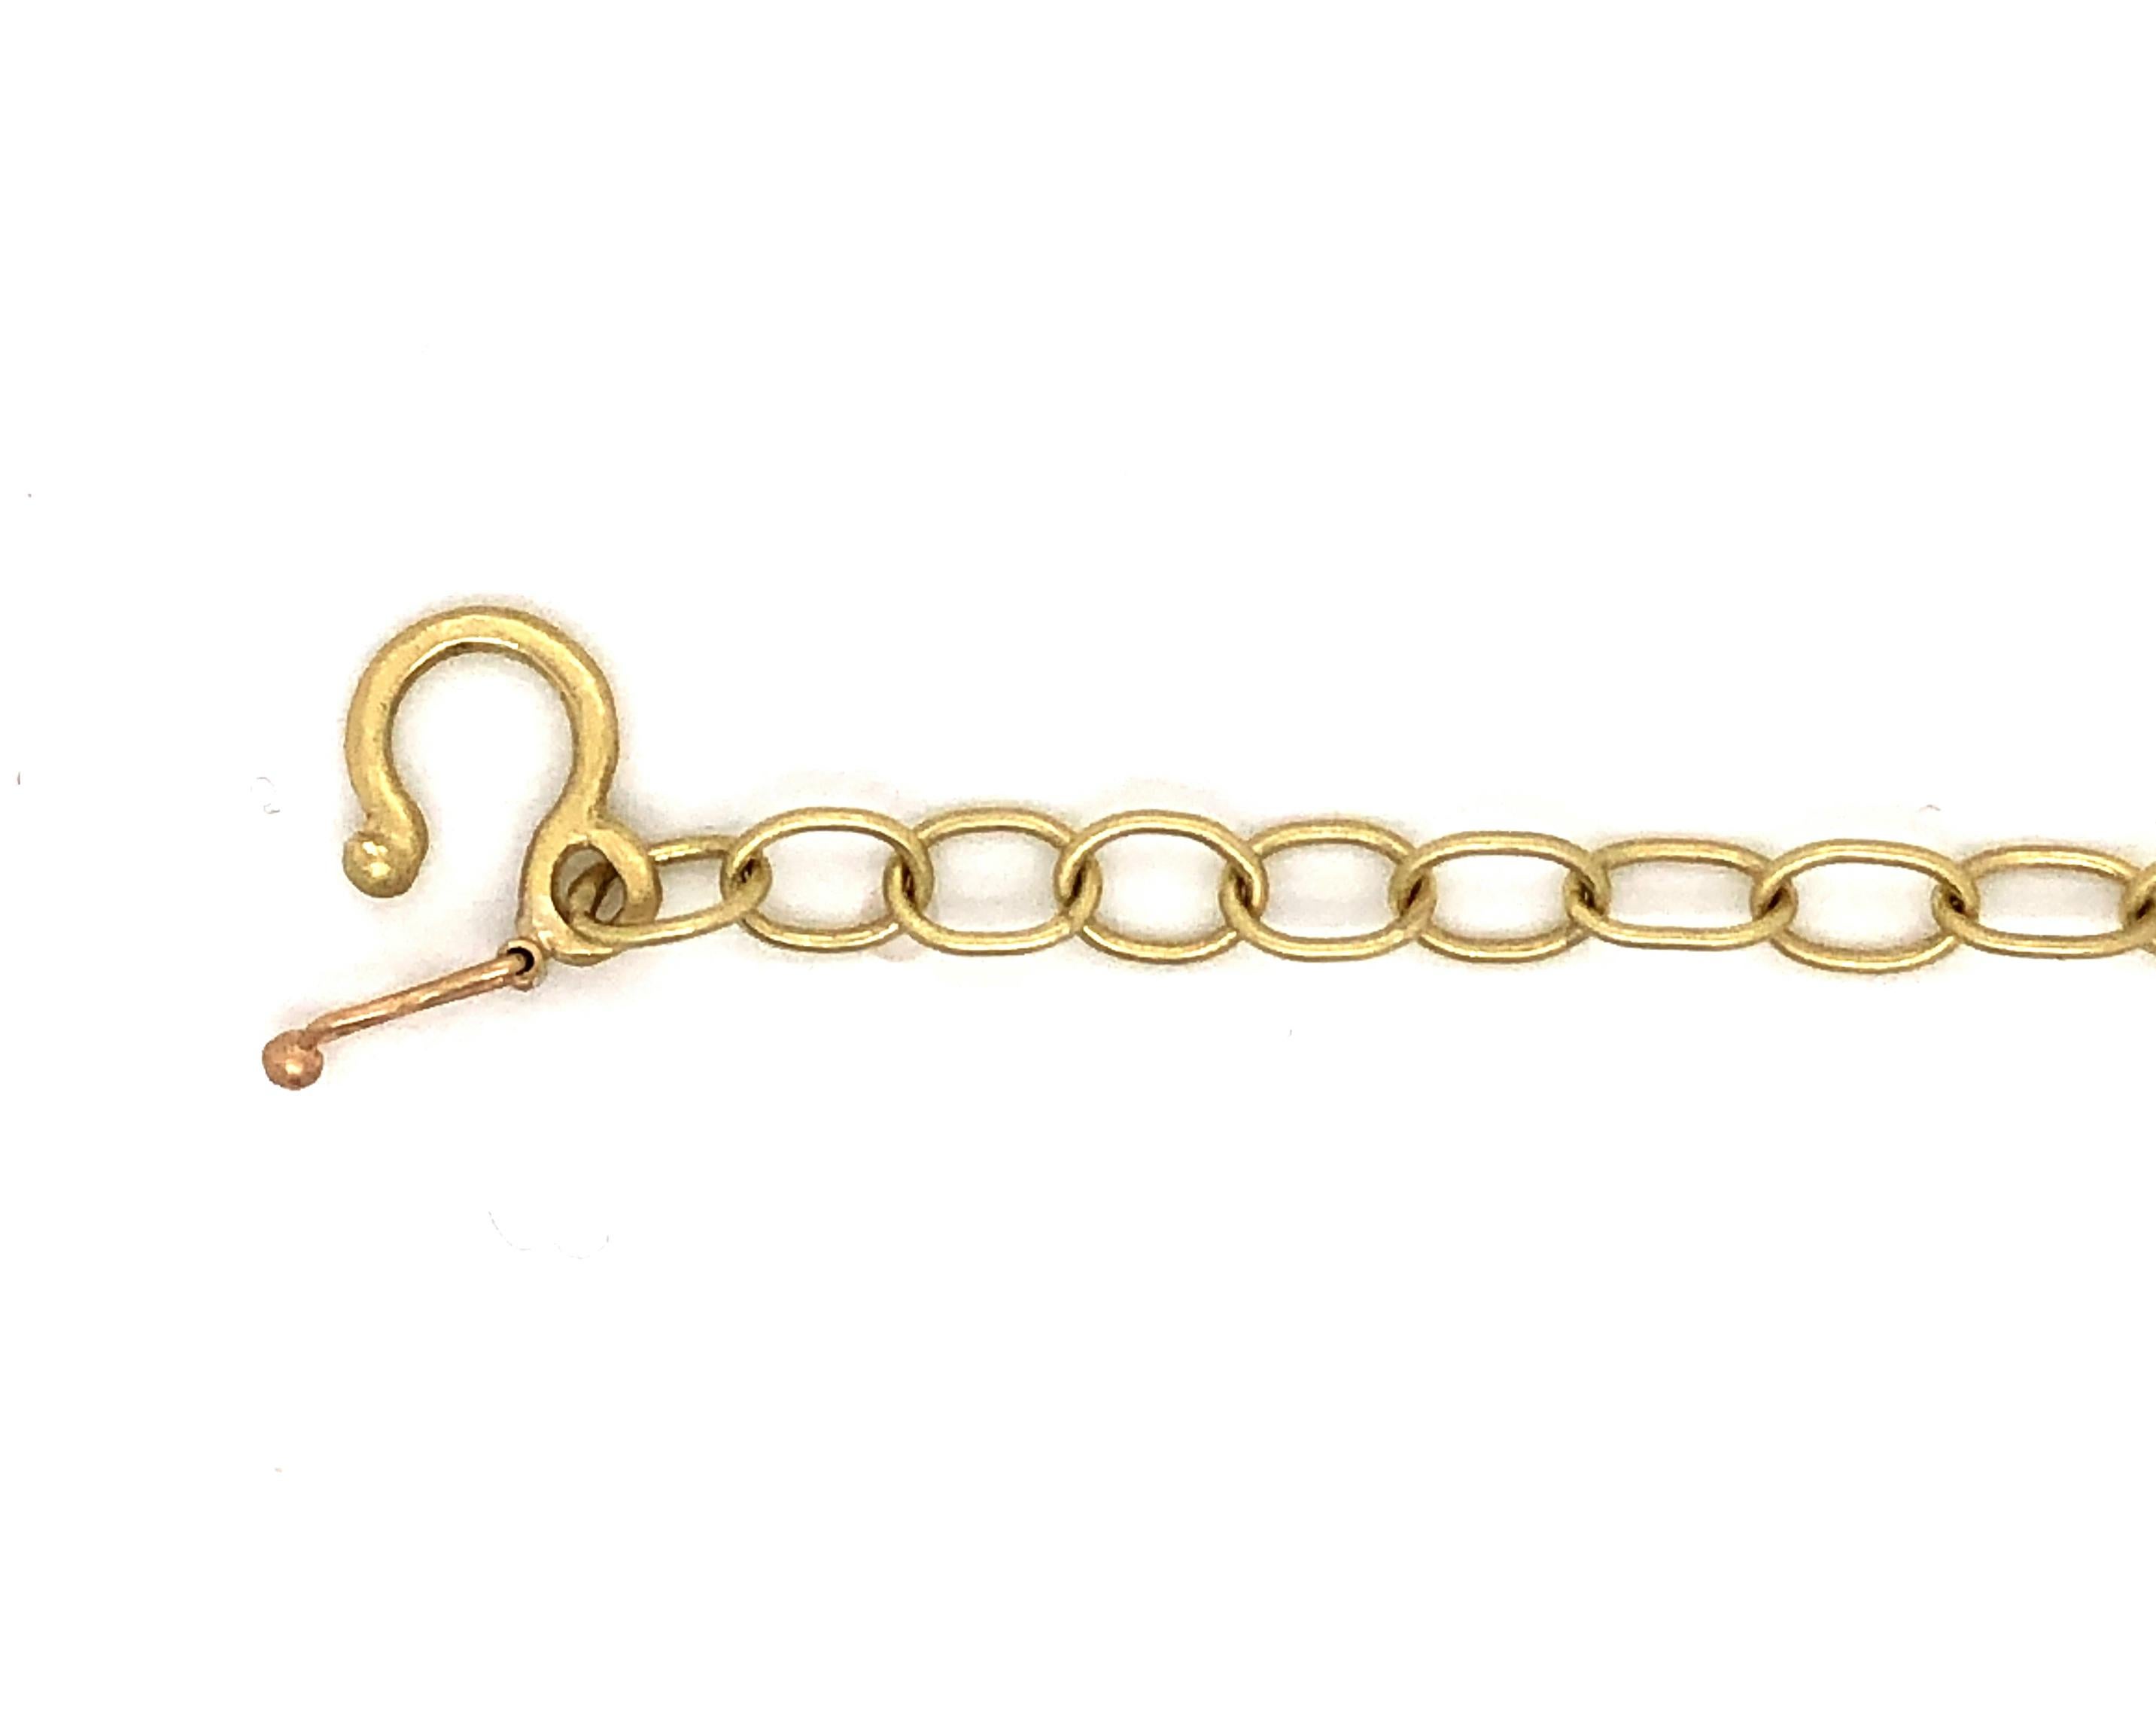 Faye Kim 18K Gold Oval Link Chain

Classic and versatile, Faye's 18k gold handmade oval link chain is a must in every jewelry wardrobe. It elevates the traditional cable link chain to a new level. Great to wear alone or as a layering piece with a